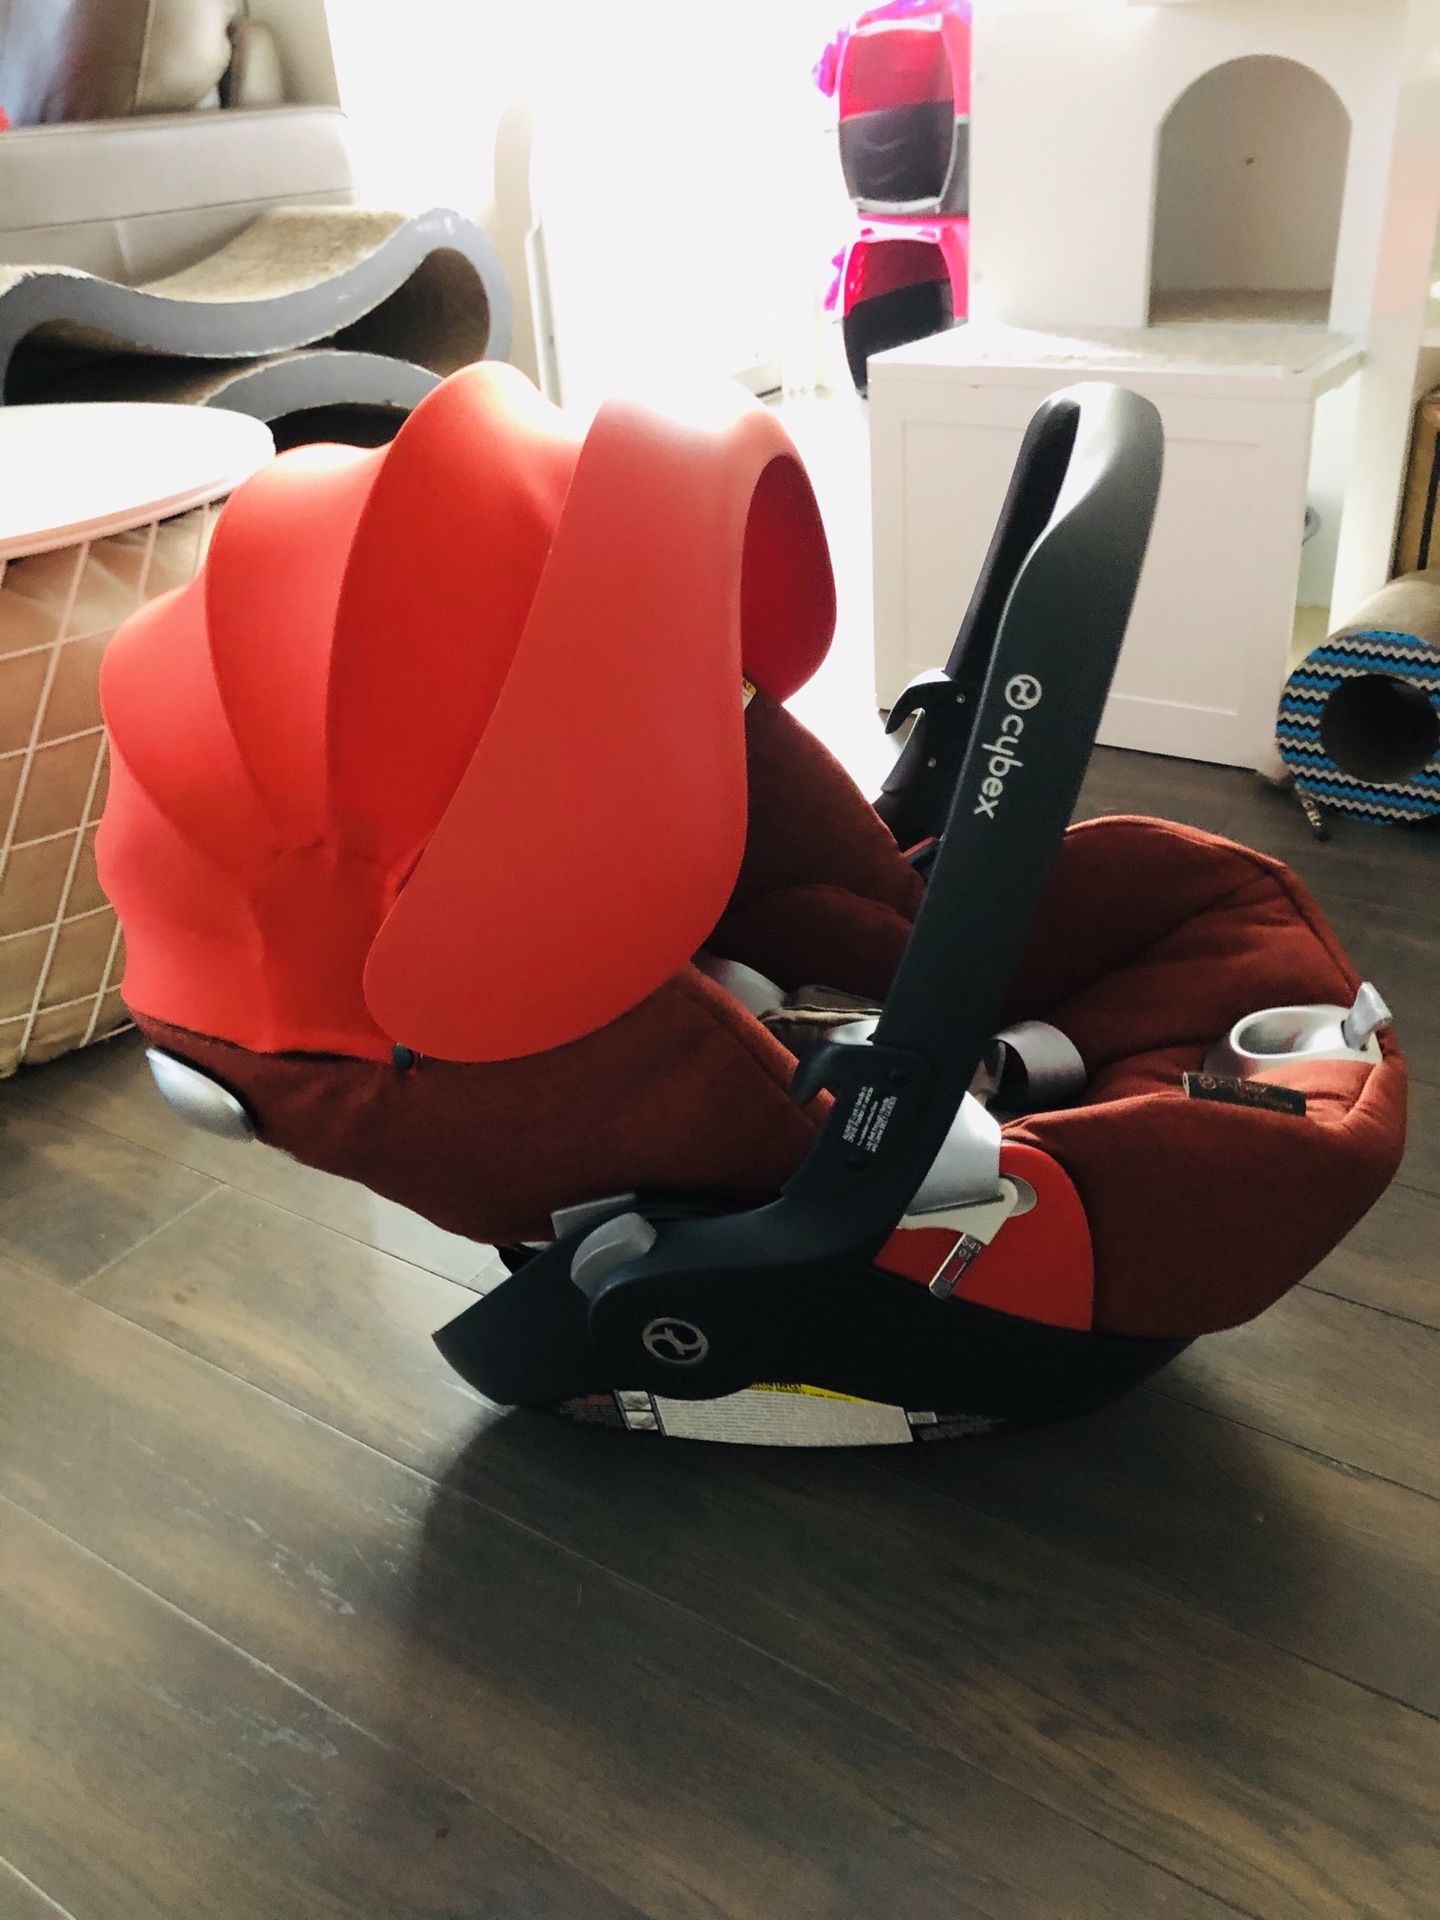 Baby items - Infant Car Seat, baby dome